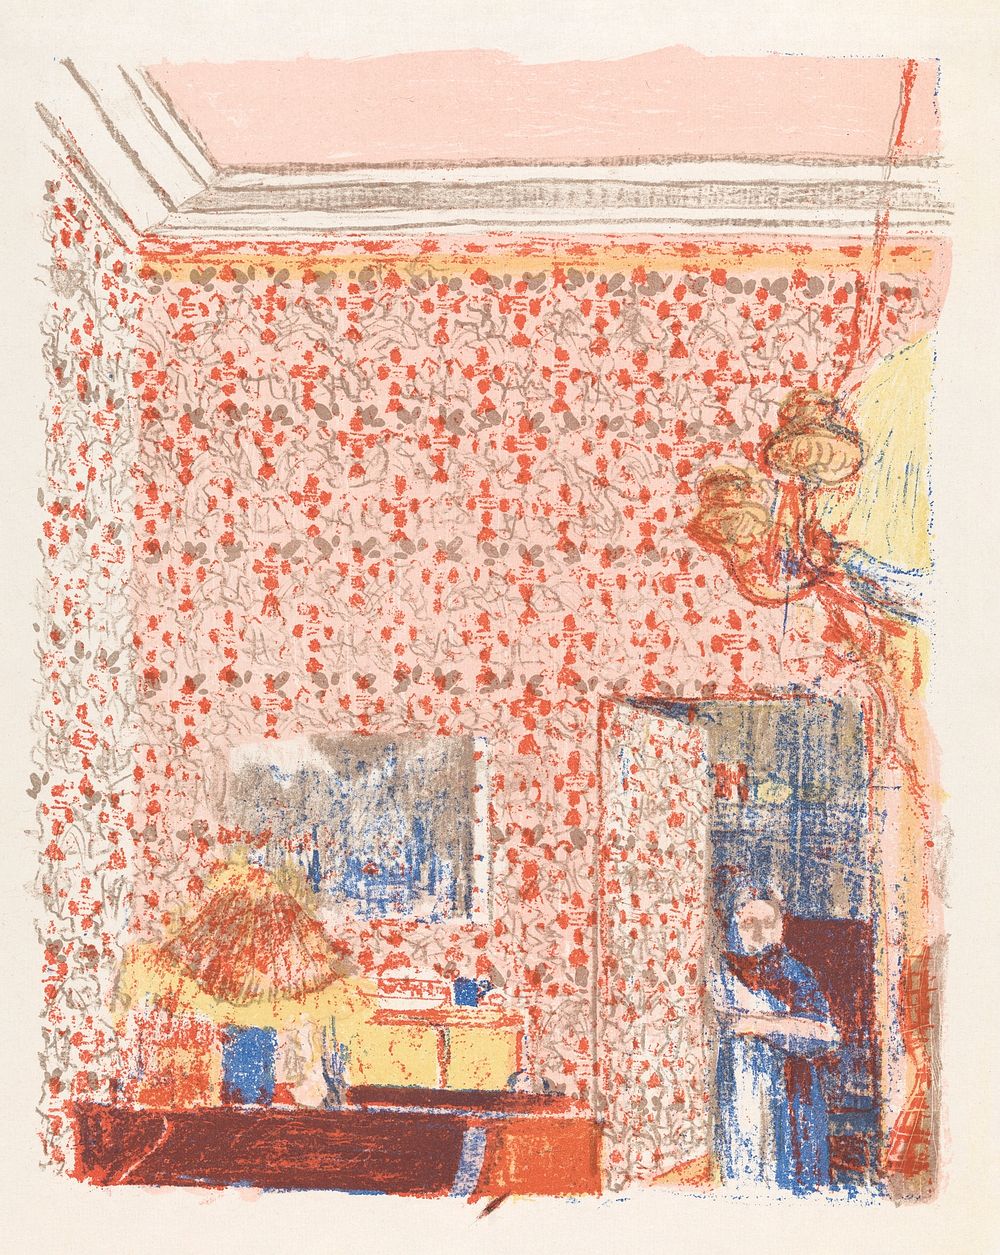 Interieur aux tentures roses I (1899) illustration by Edouard Vuillard. Original public domain image from The Statens Museum…